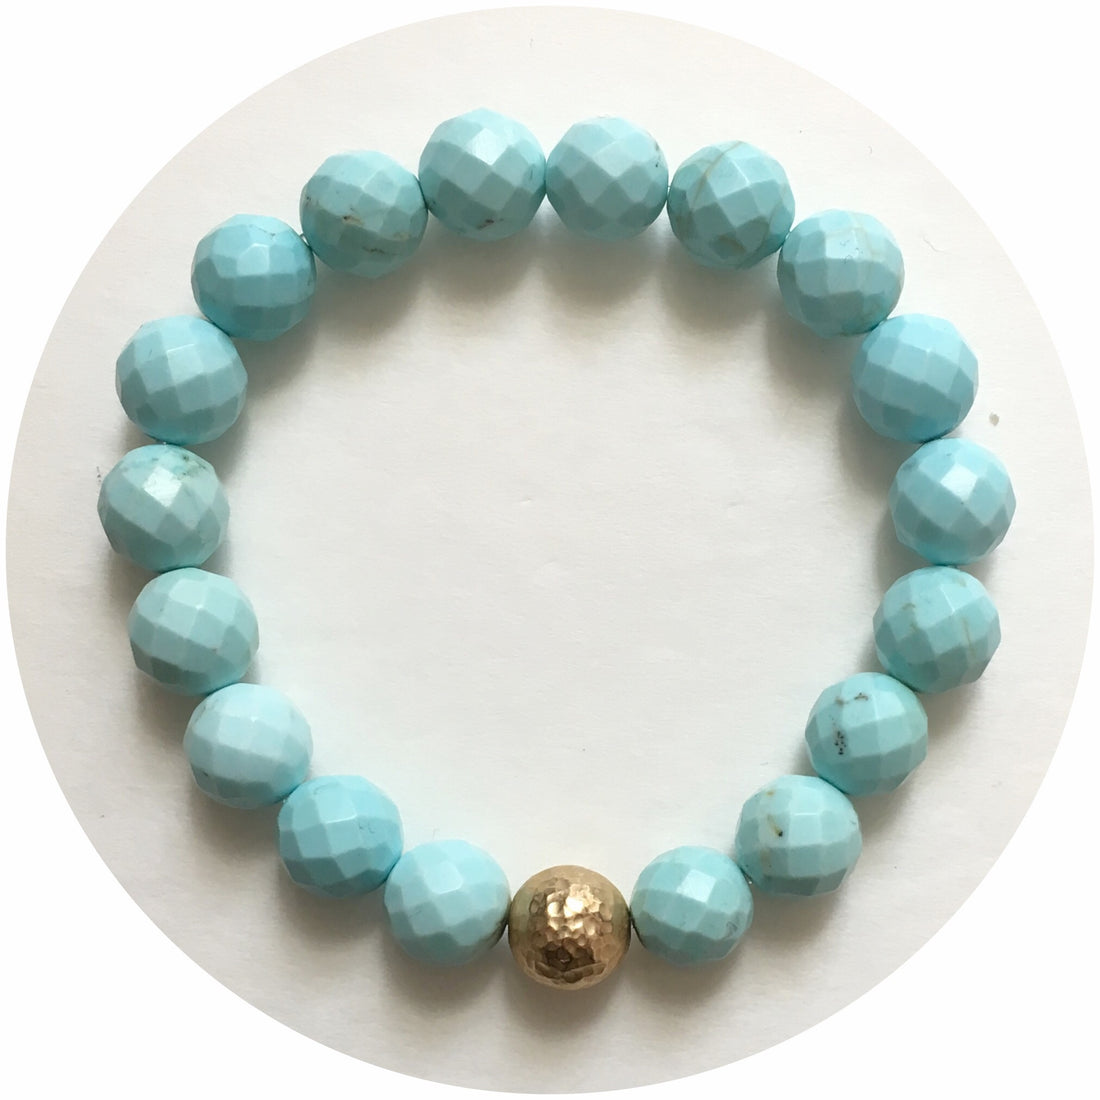 Light Turquoise Magnesite with Hammered Gold Accent - Oriana Lamarca LLC